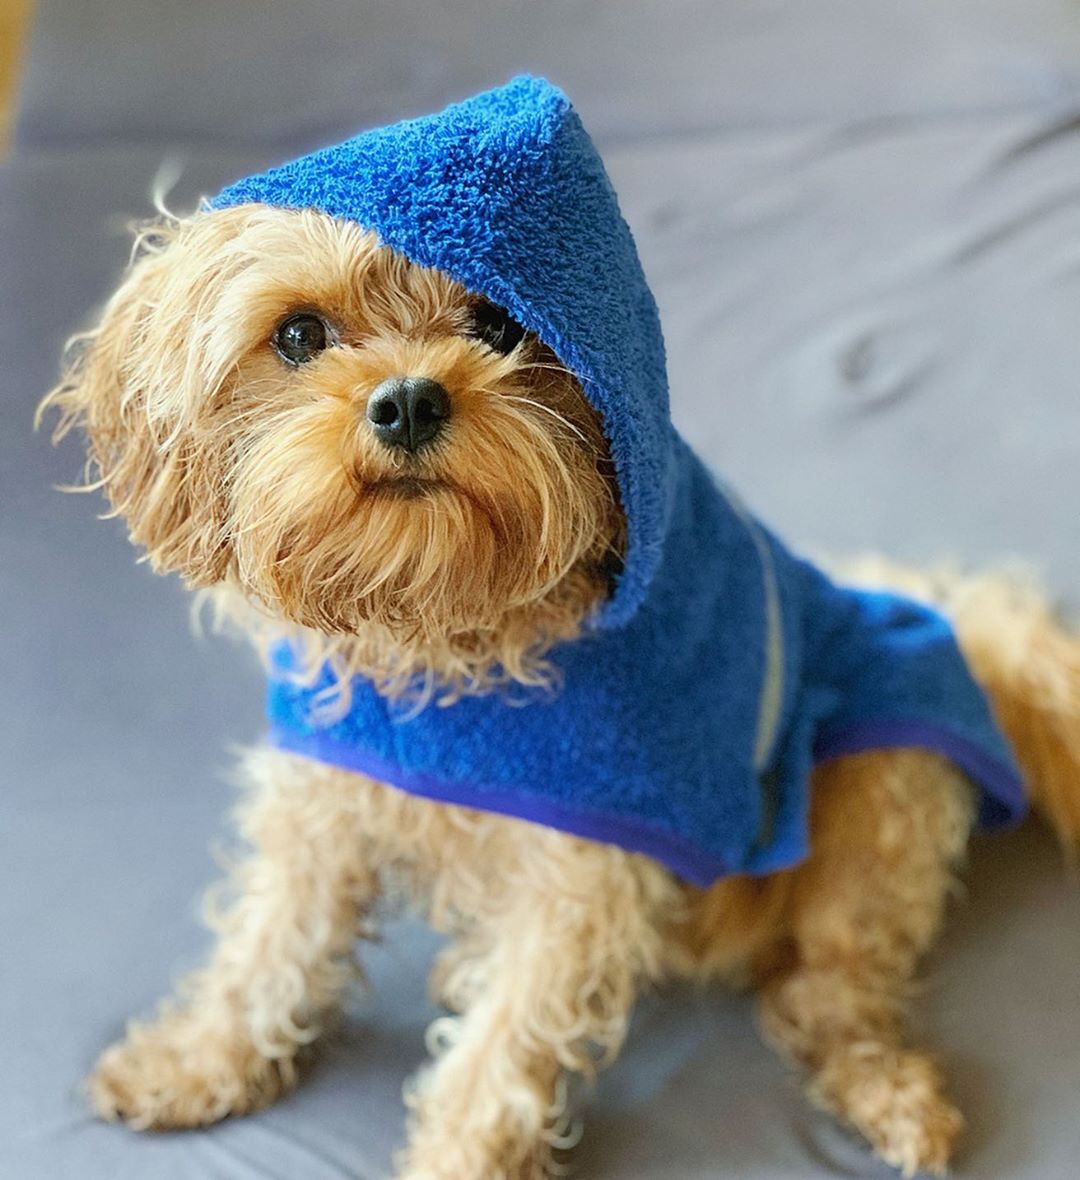 Cavapoo Monty in his blue drying poncho